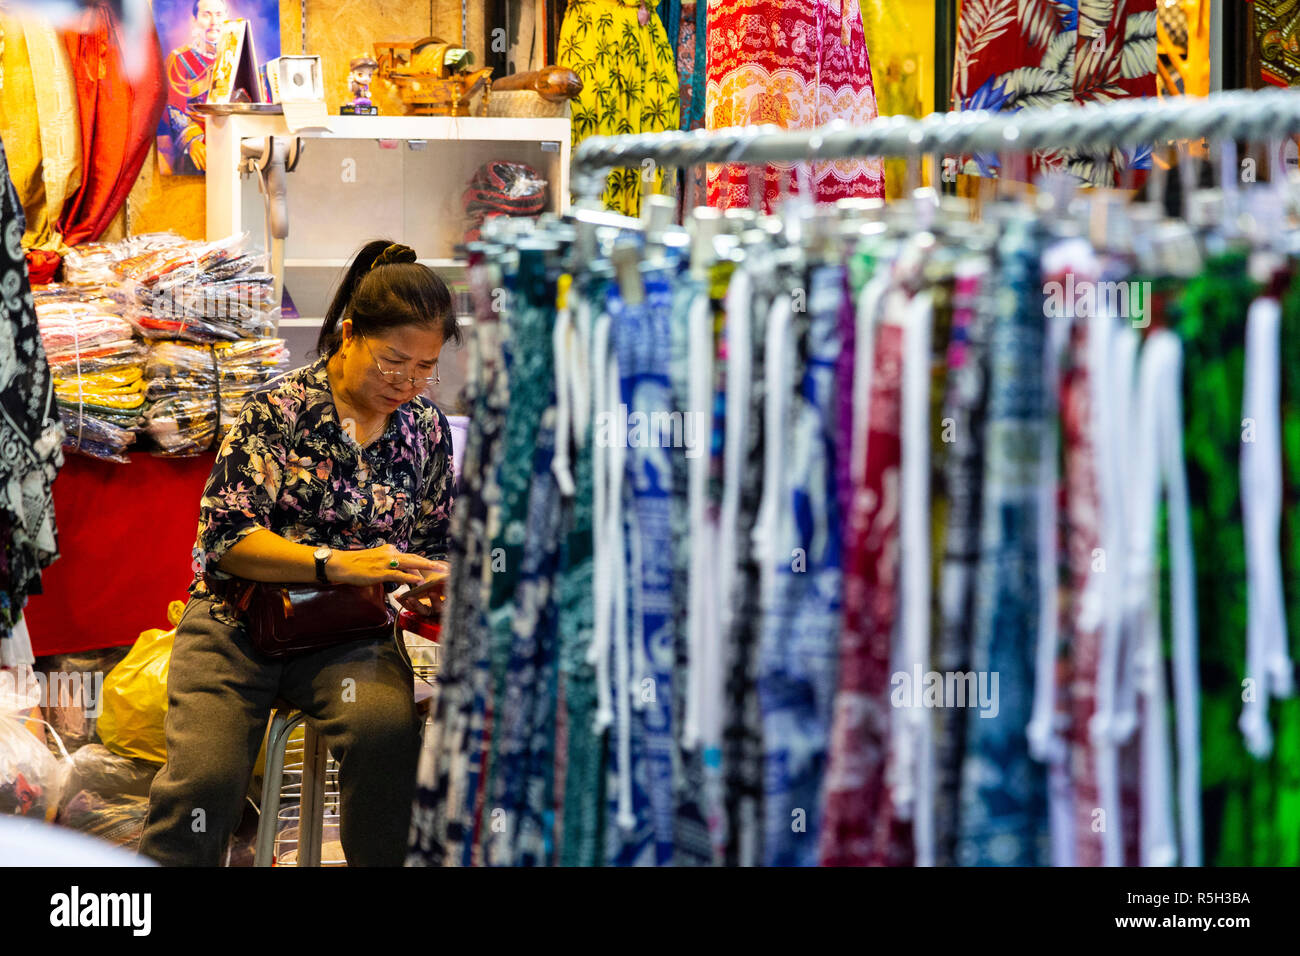 aleswoman sitting in a clothing store with very colorful clothes and waiting for tourists Stock Photo